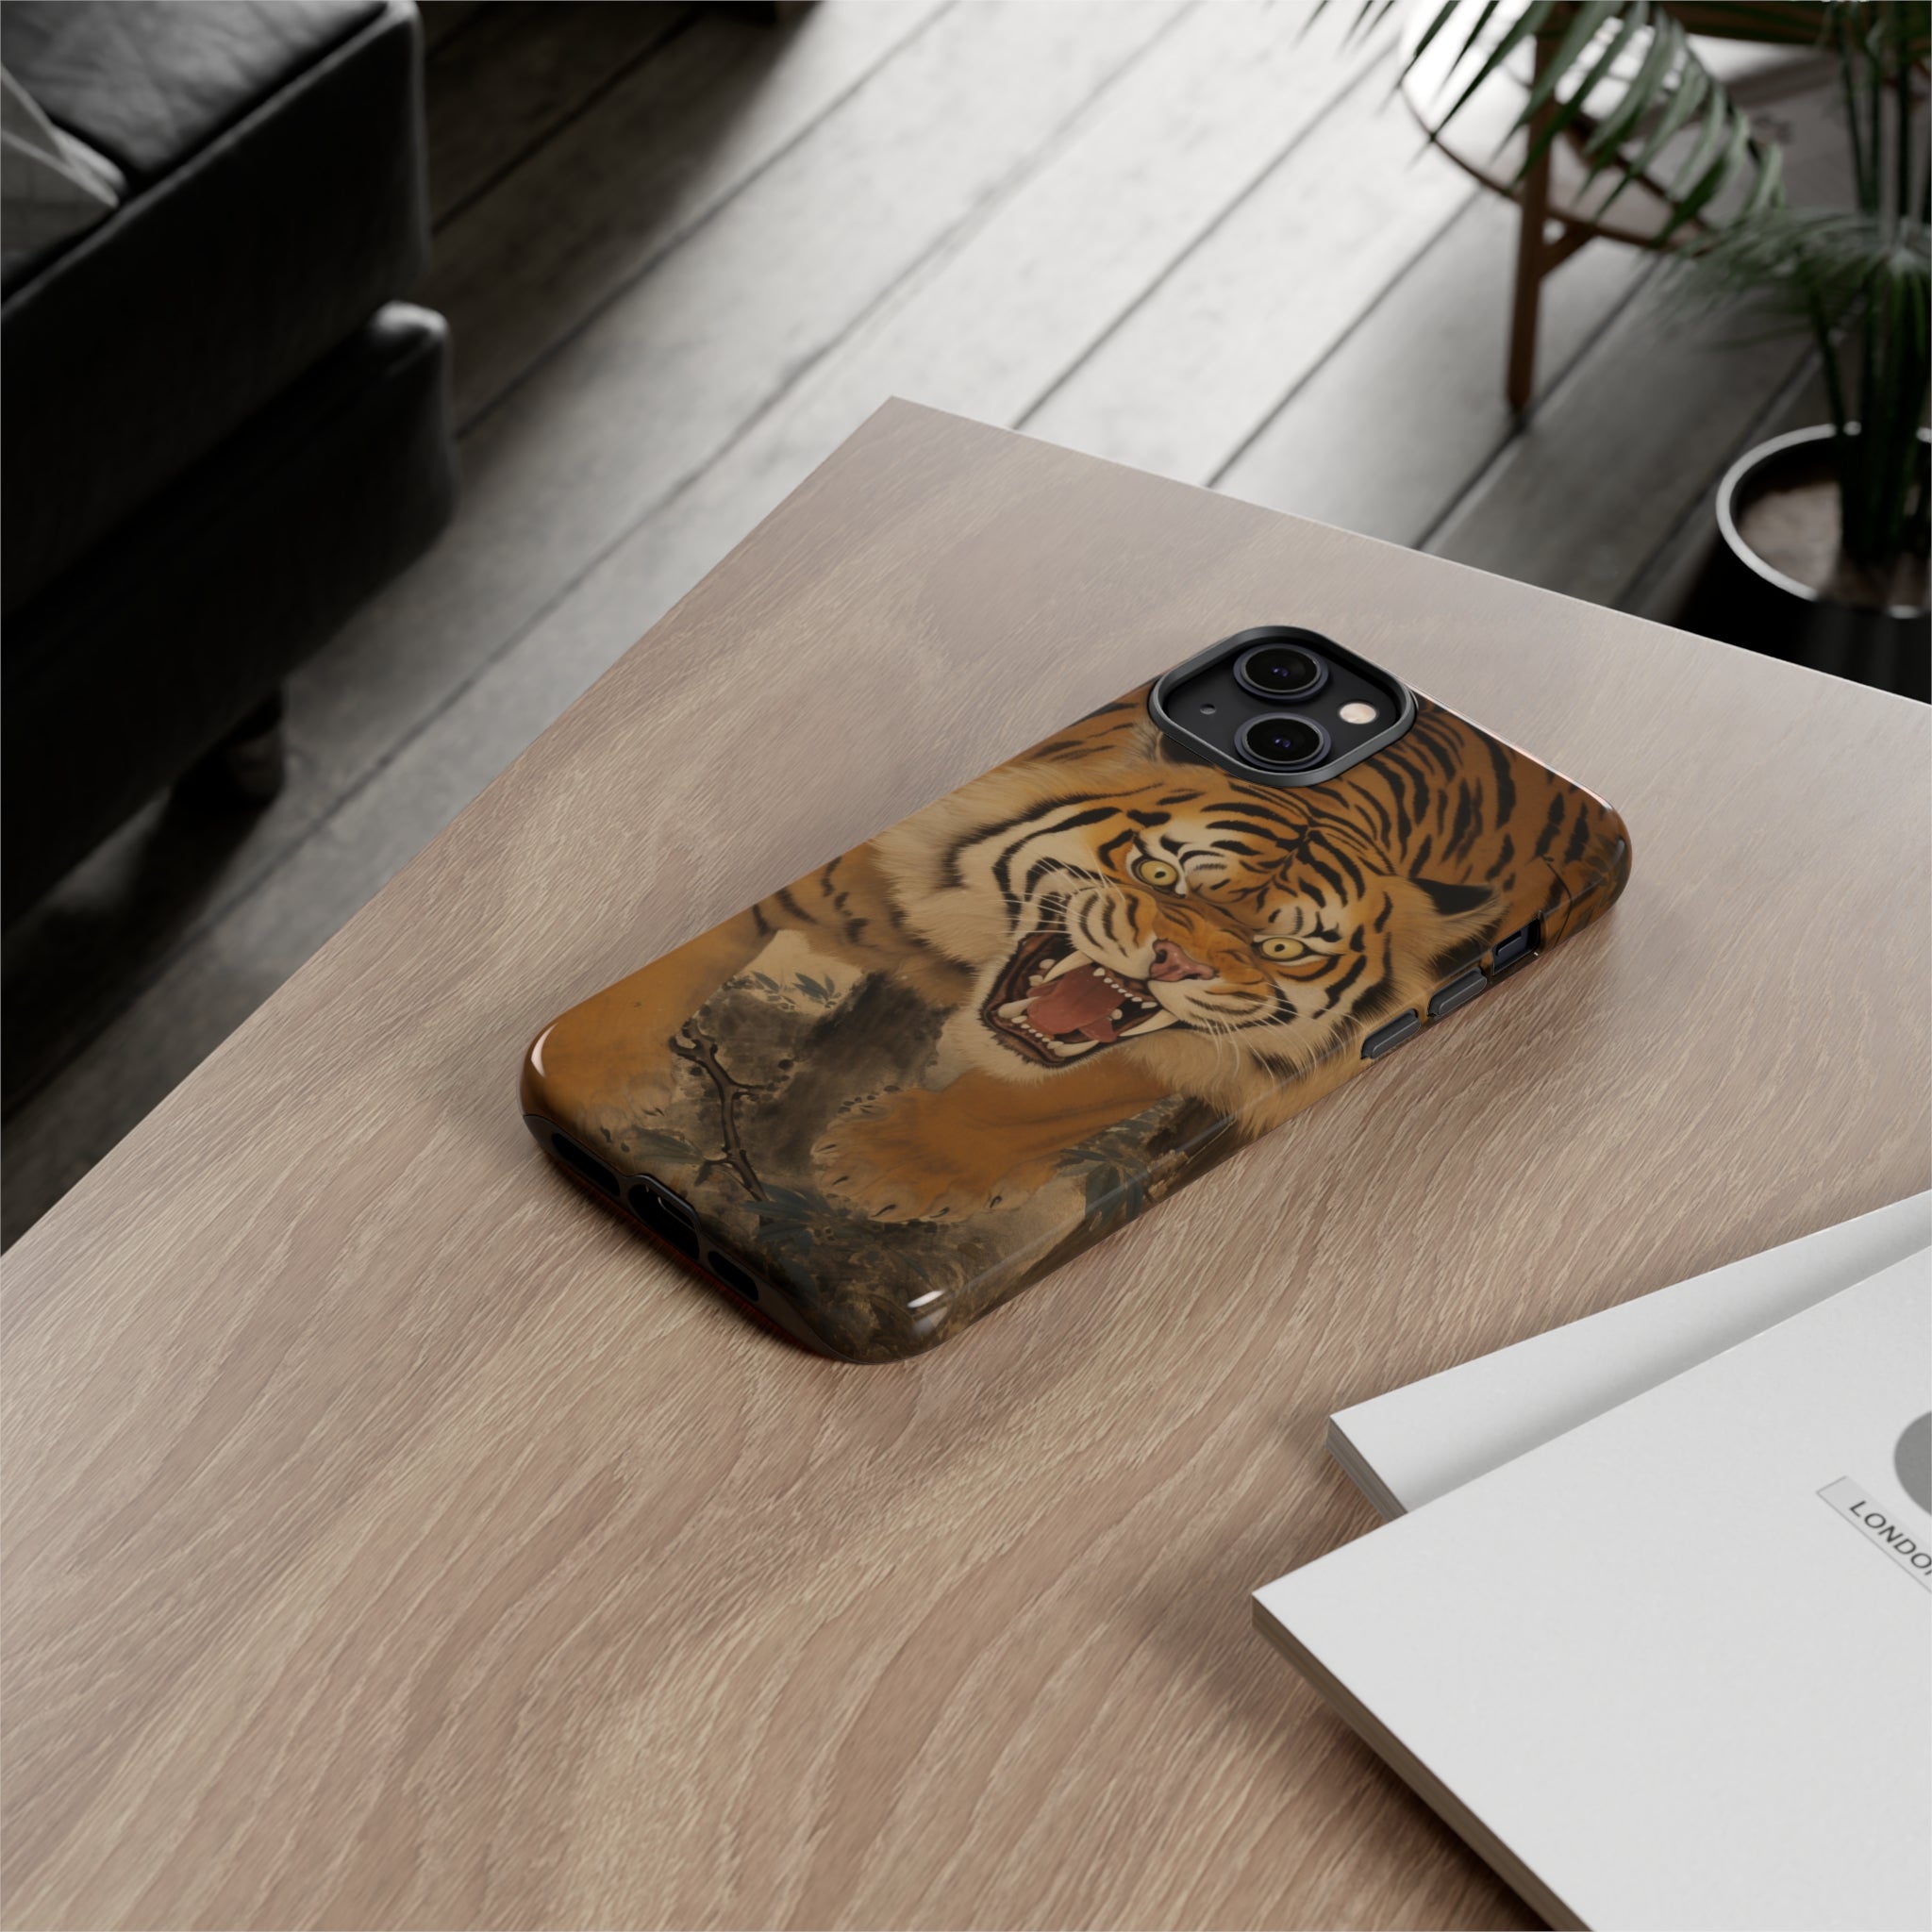 King Co. Phone Case